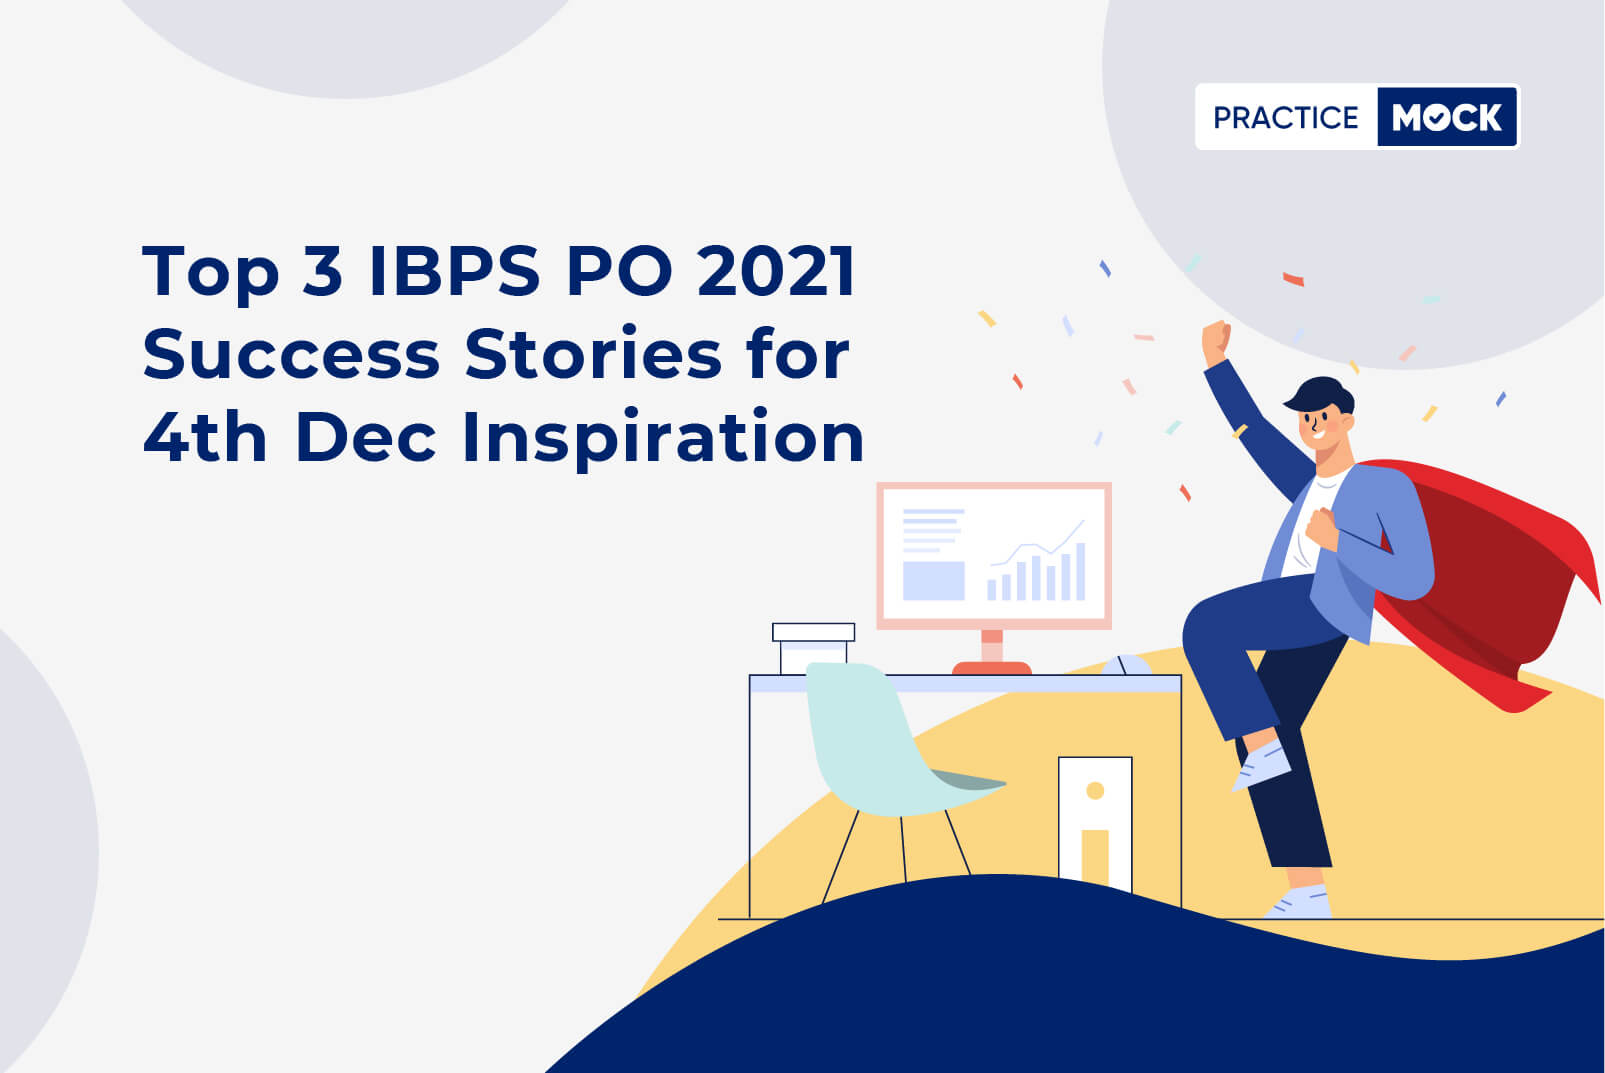 Top 3 IBPS PO Success Stories for 4th Dec Inspiration